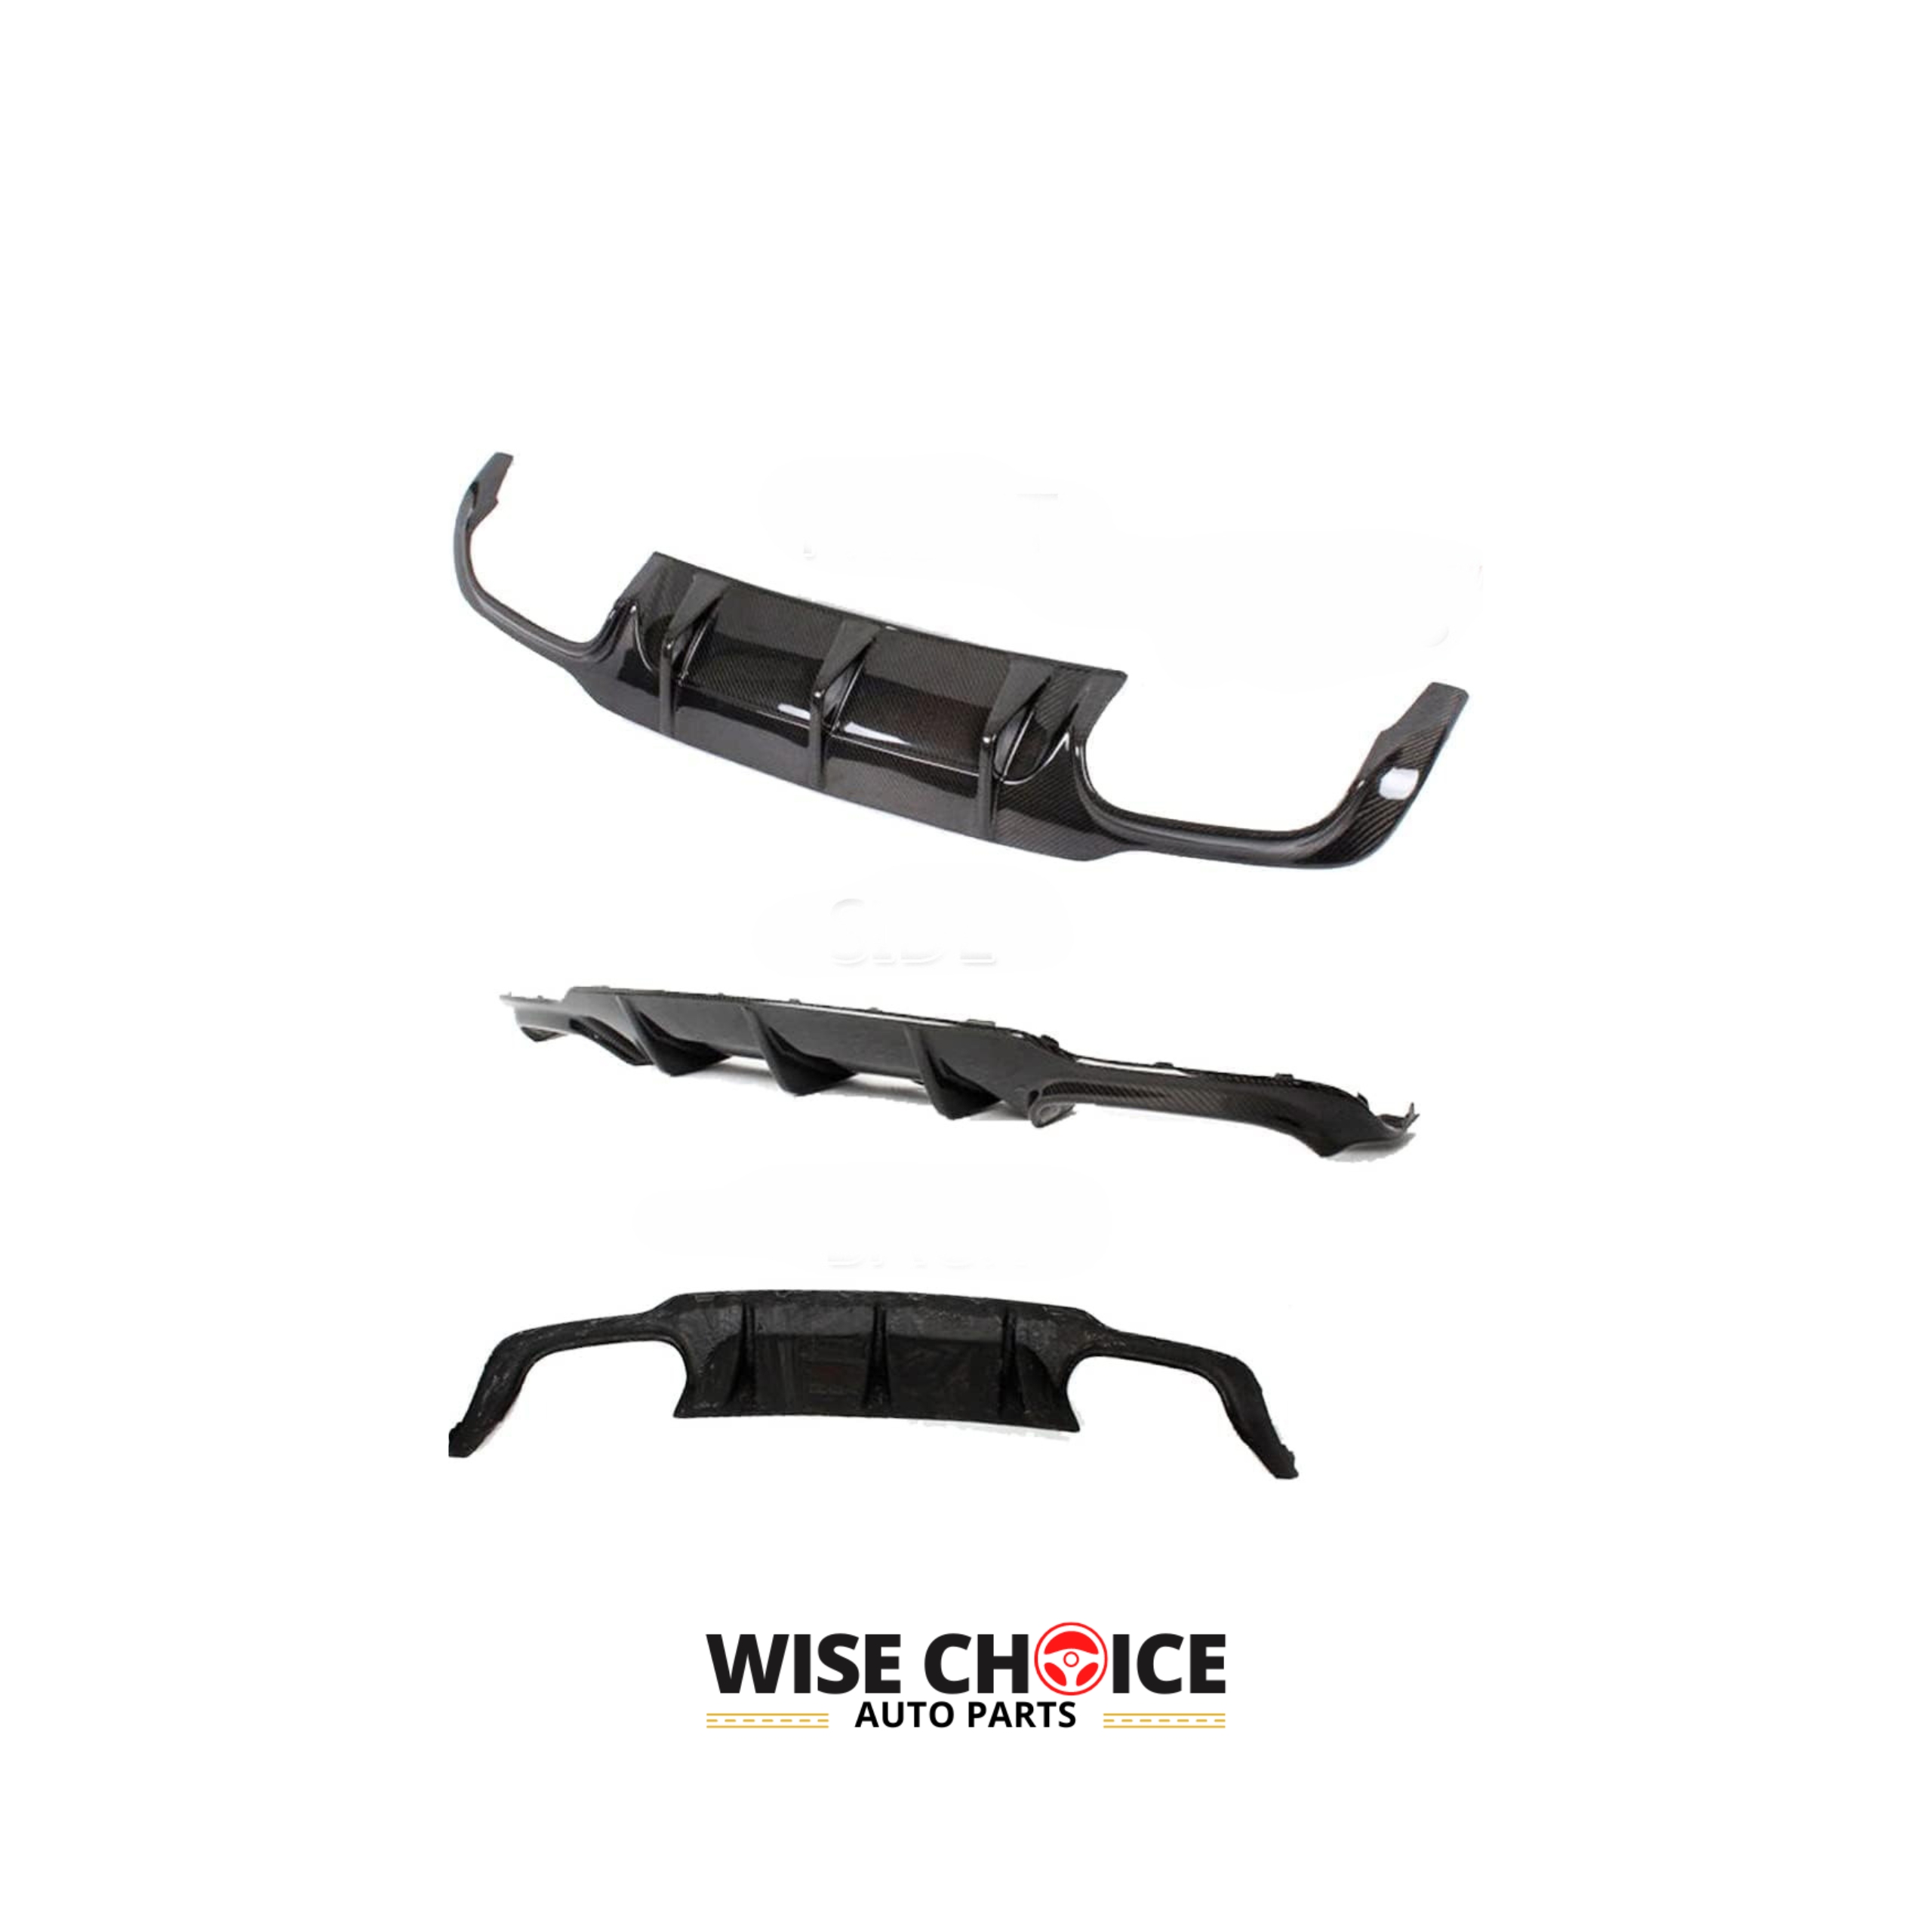 Dry Carbon Fiber Diffuser for 2007-2014 W204 Benz C Class models, including C300 Sport and C63 AMG